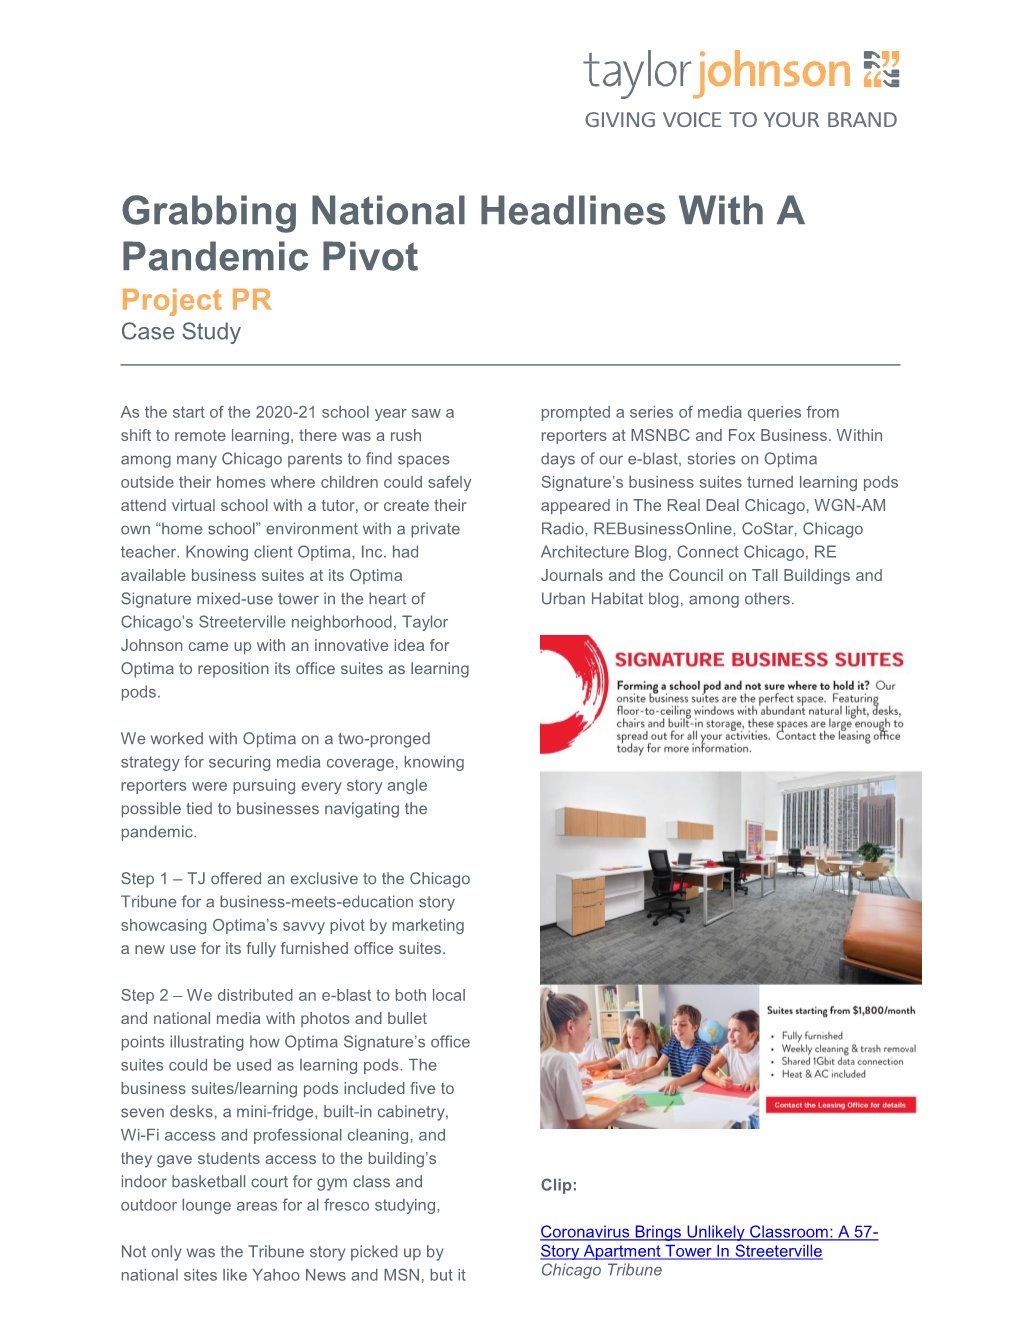 Grabbing National Headlines with a Pandemic Pivot Project PR Case Study